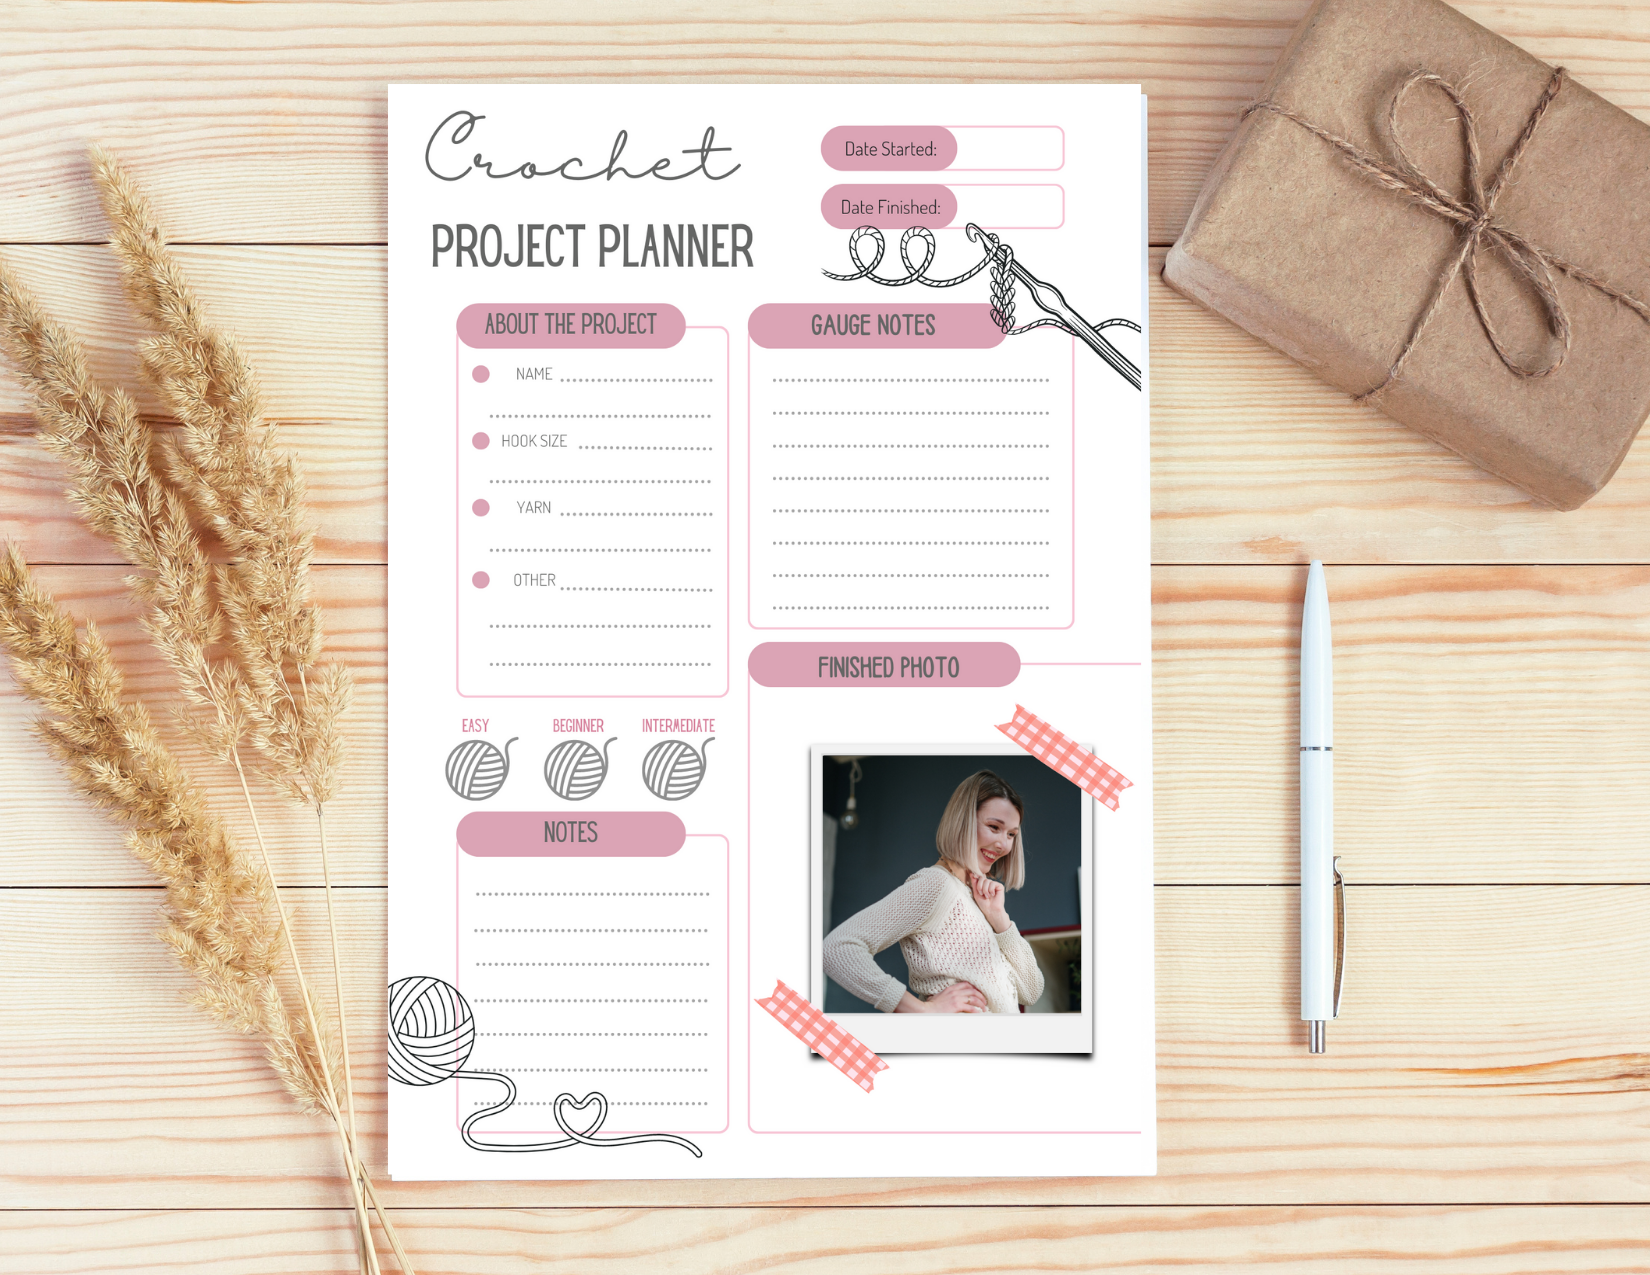 Free Printable Crochet Planner Pages